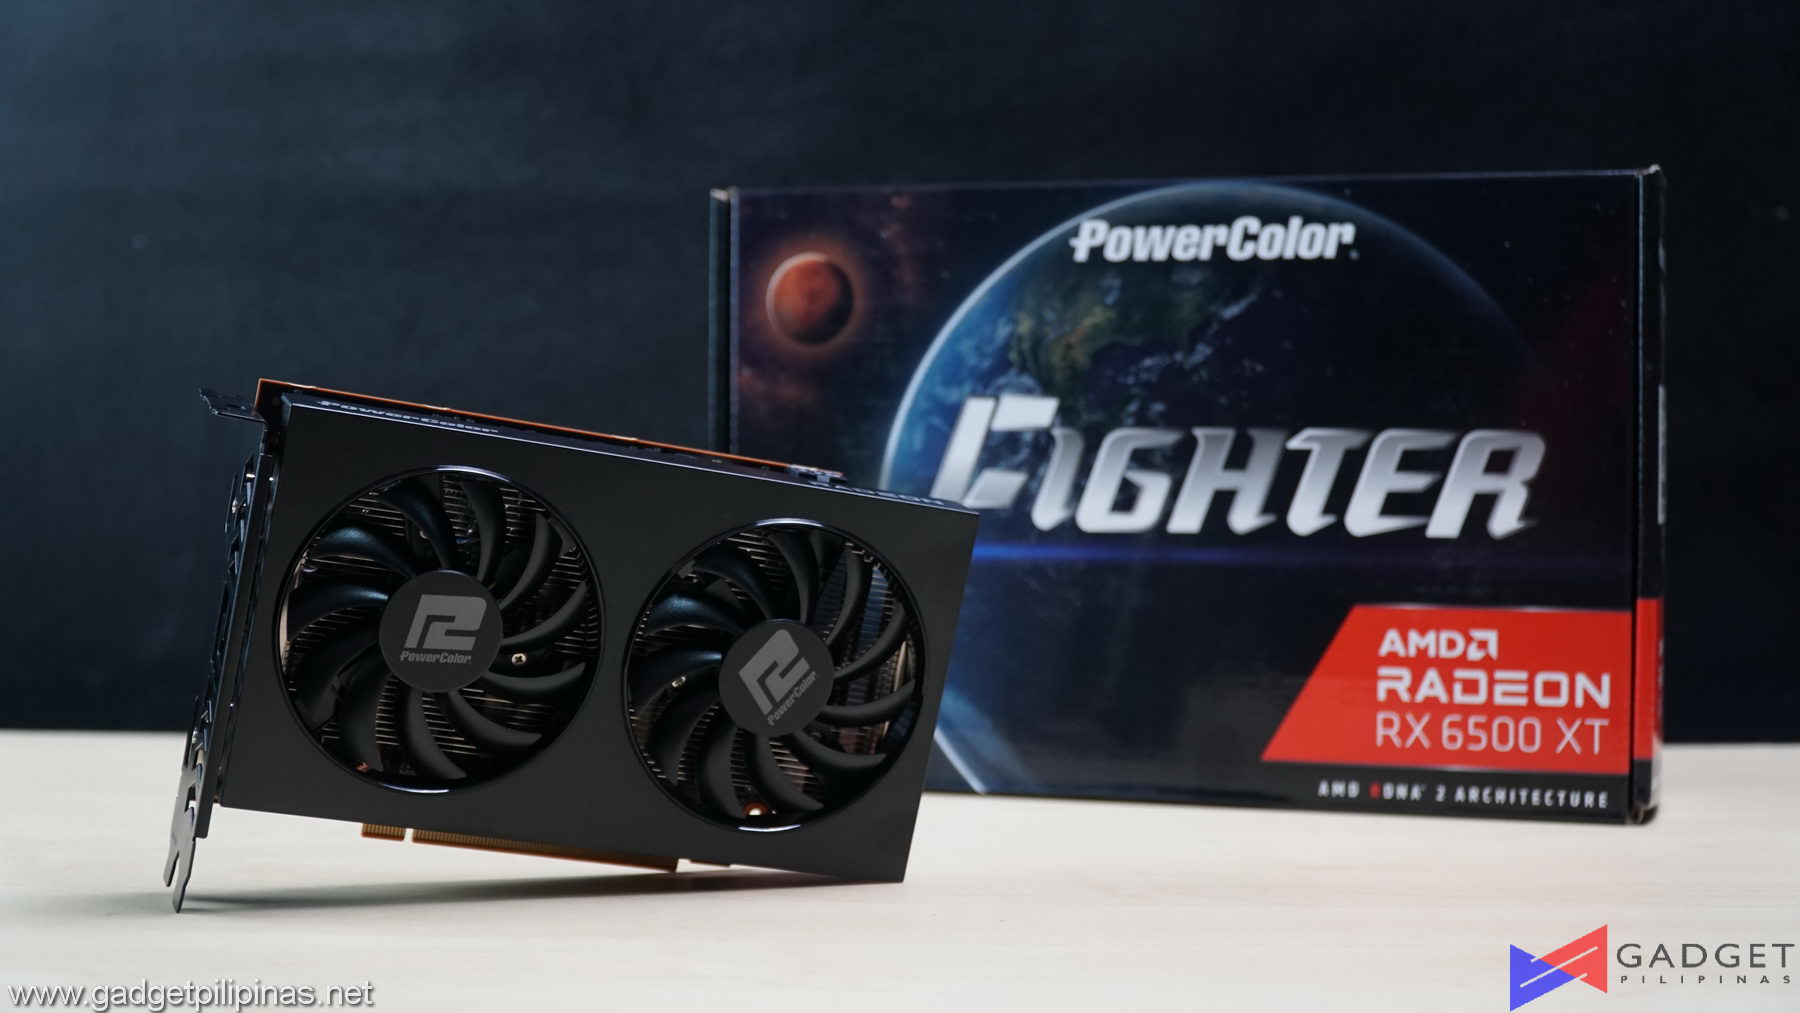 PowerColor Radeon RX 6500 XT Fighter 4GB Graphics Card Review – Still Relevant?